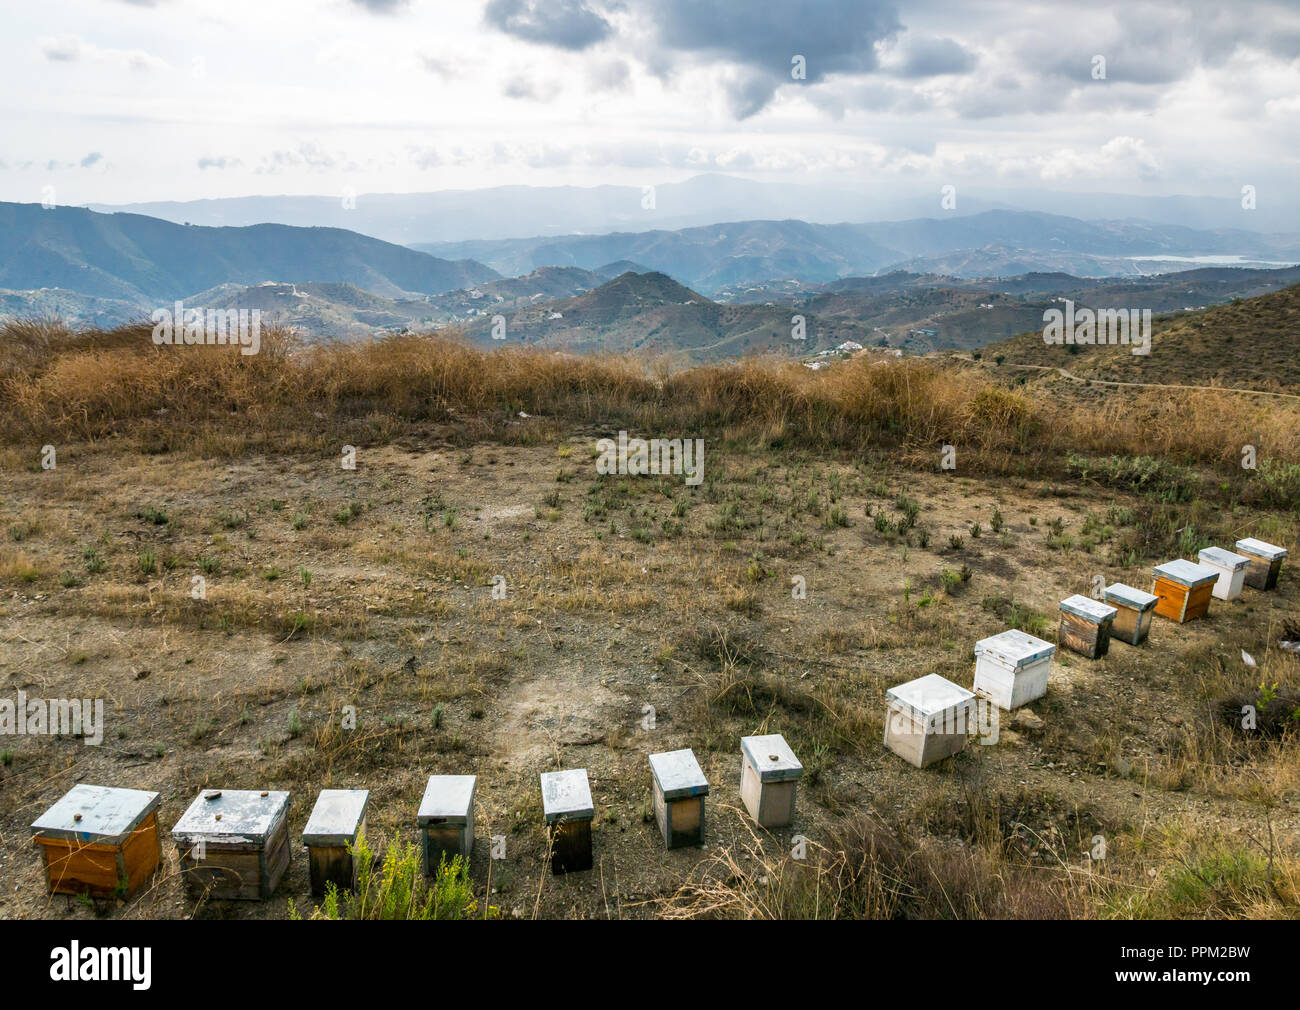 Row of beehives on hilltop overlooking valleys and mountains, Axarquia, Andalusia, Spain Stock Photo